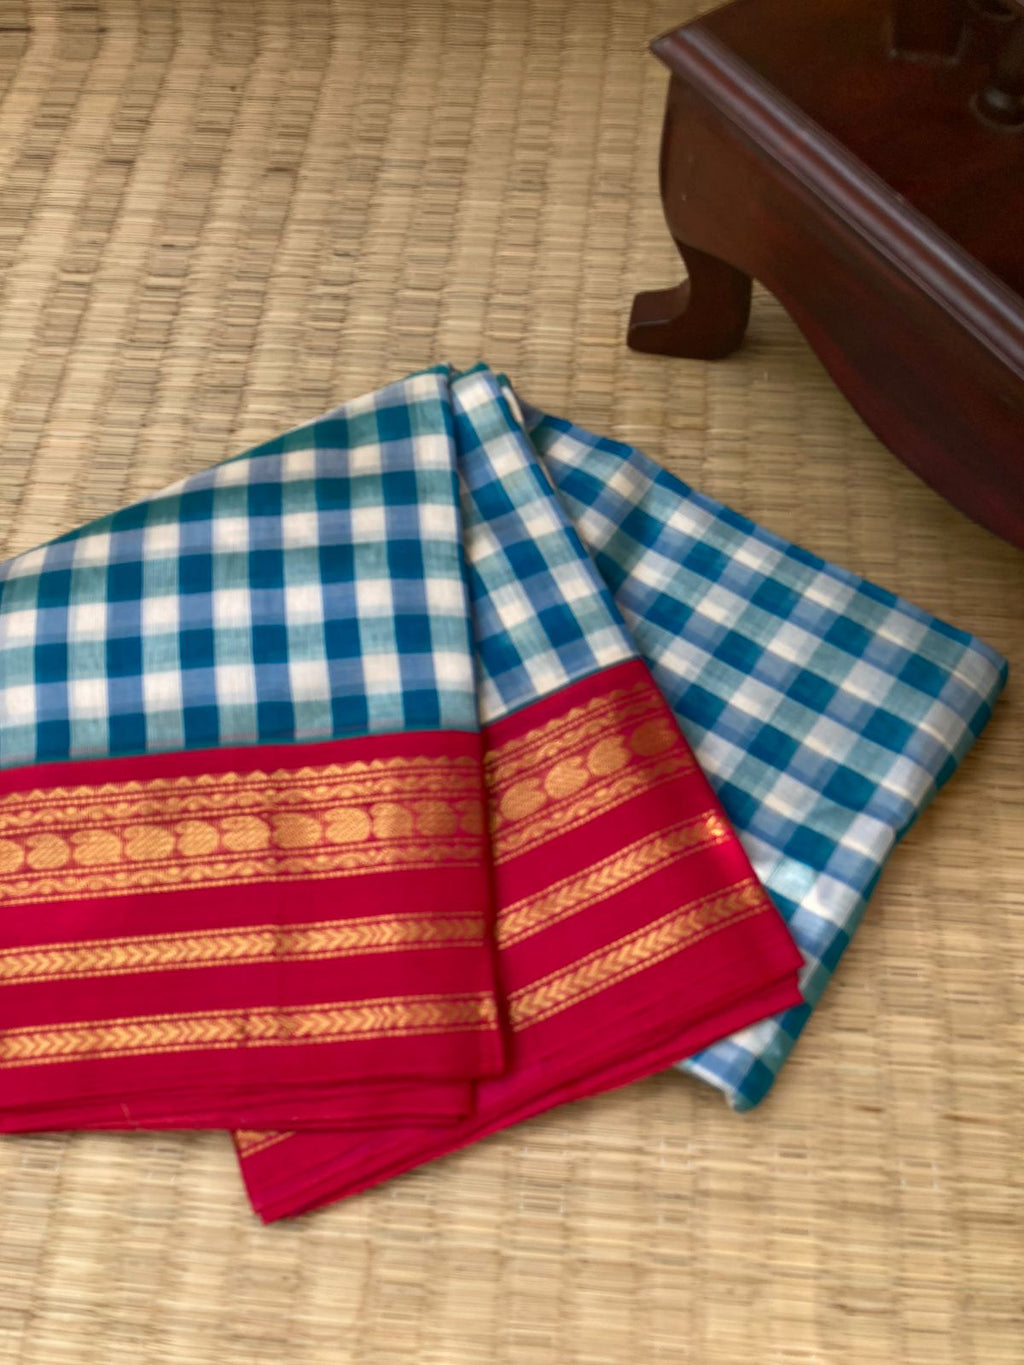 Paalum Palamum Kattams Korvai Silk Cottons - off white and blue chexs with red borders